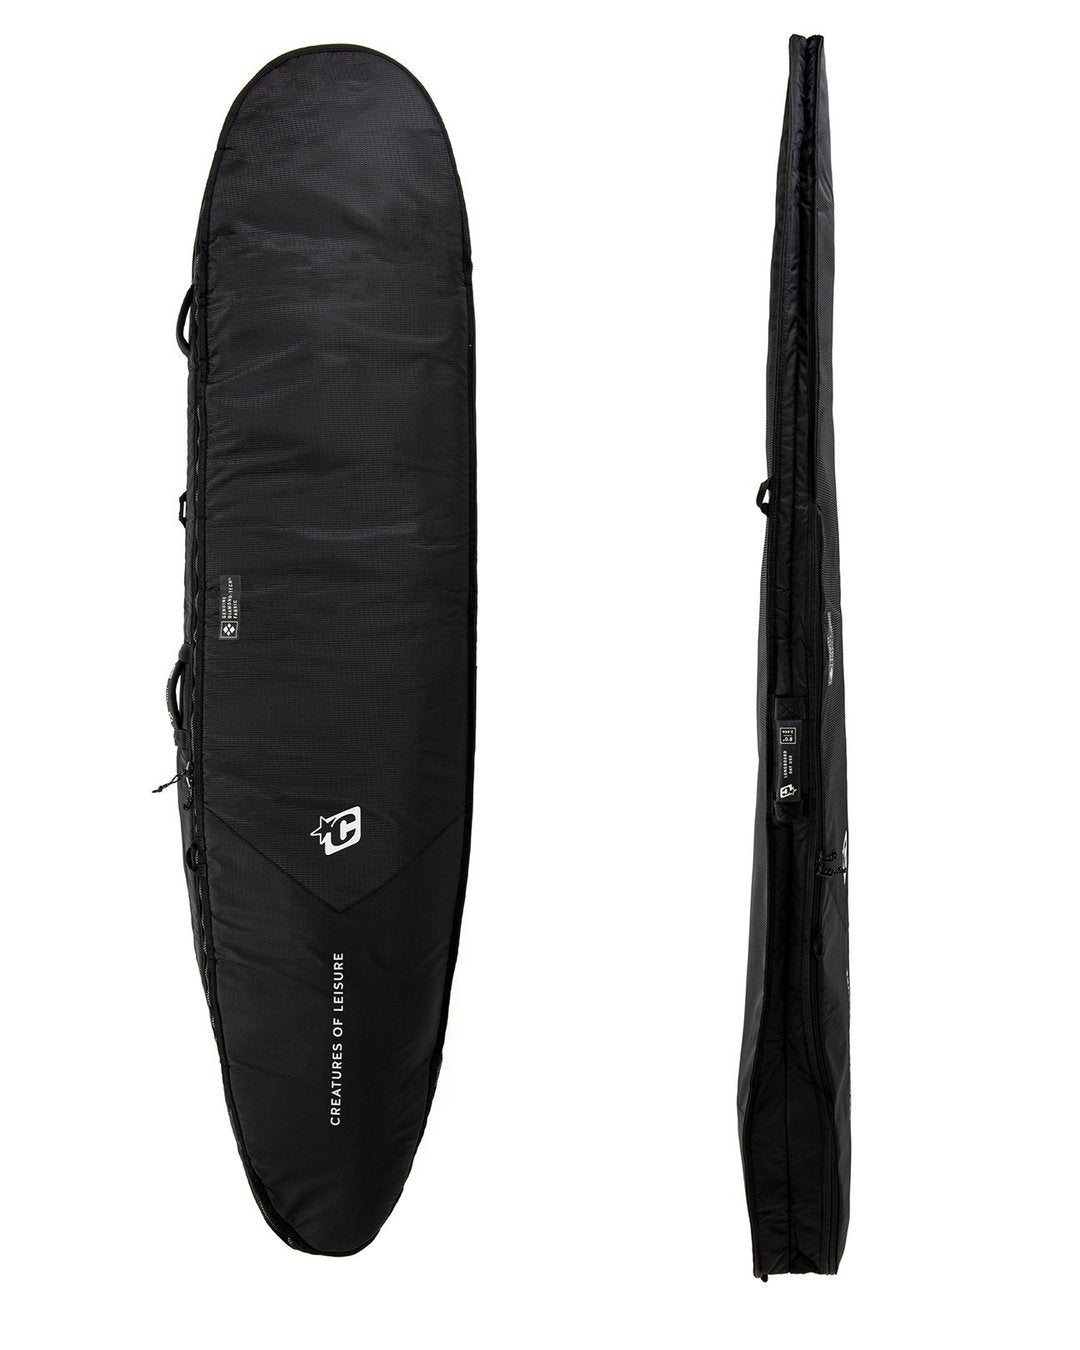 Creatures LONGBOARD DAY USE DT2.0 8'0" : BLACK SILVER - Board Store CreaturesBoardcover  